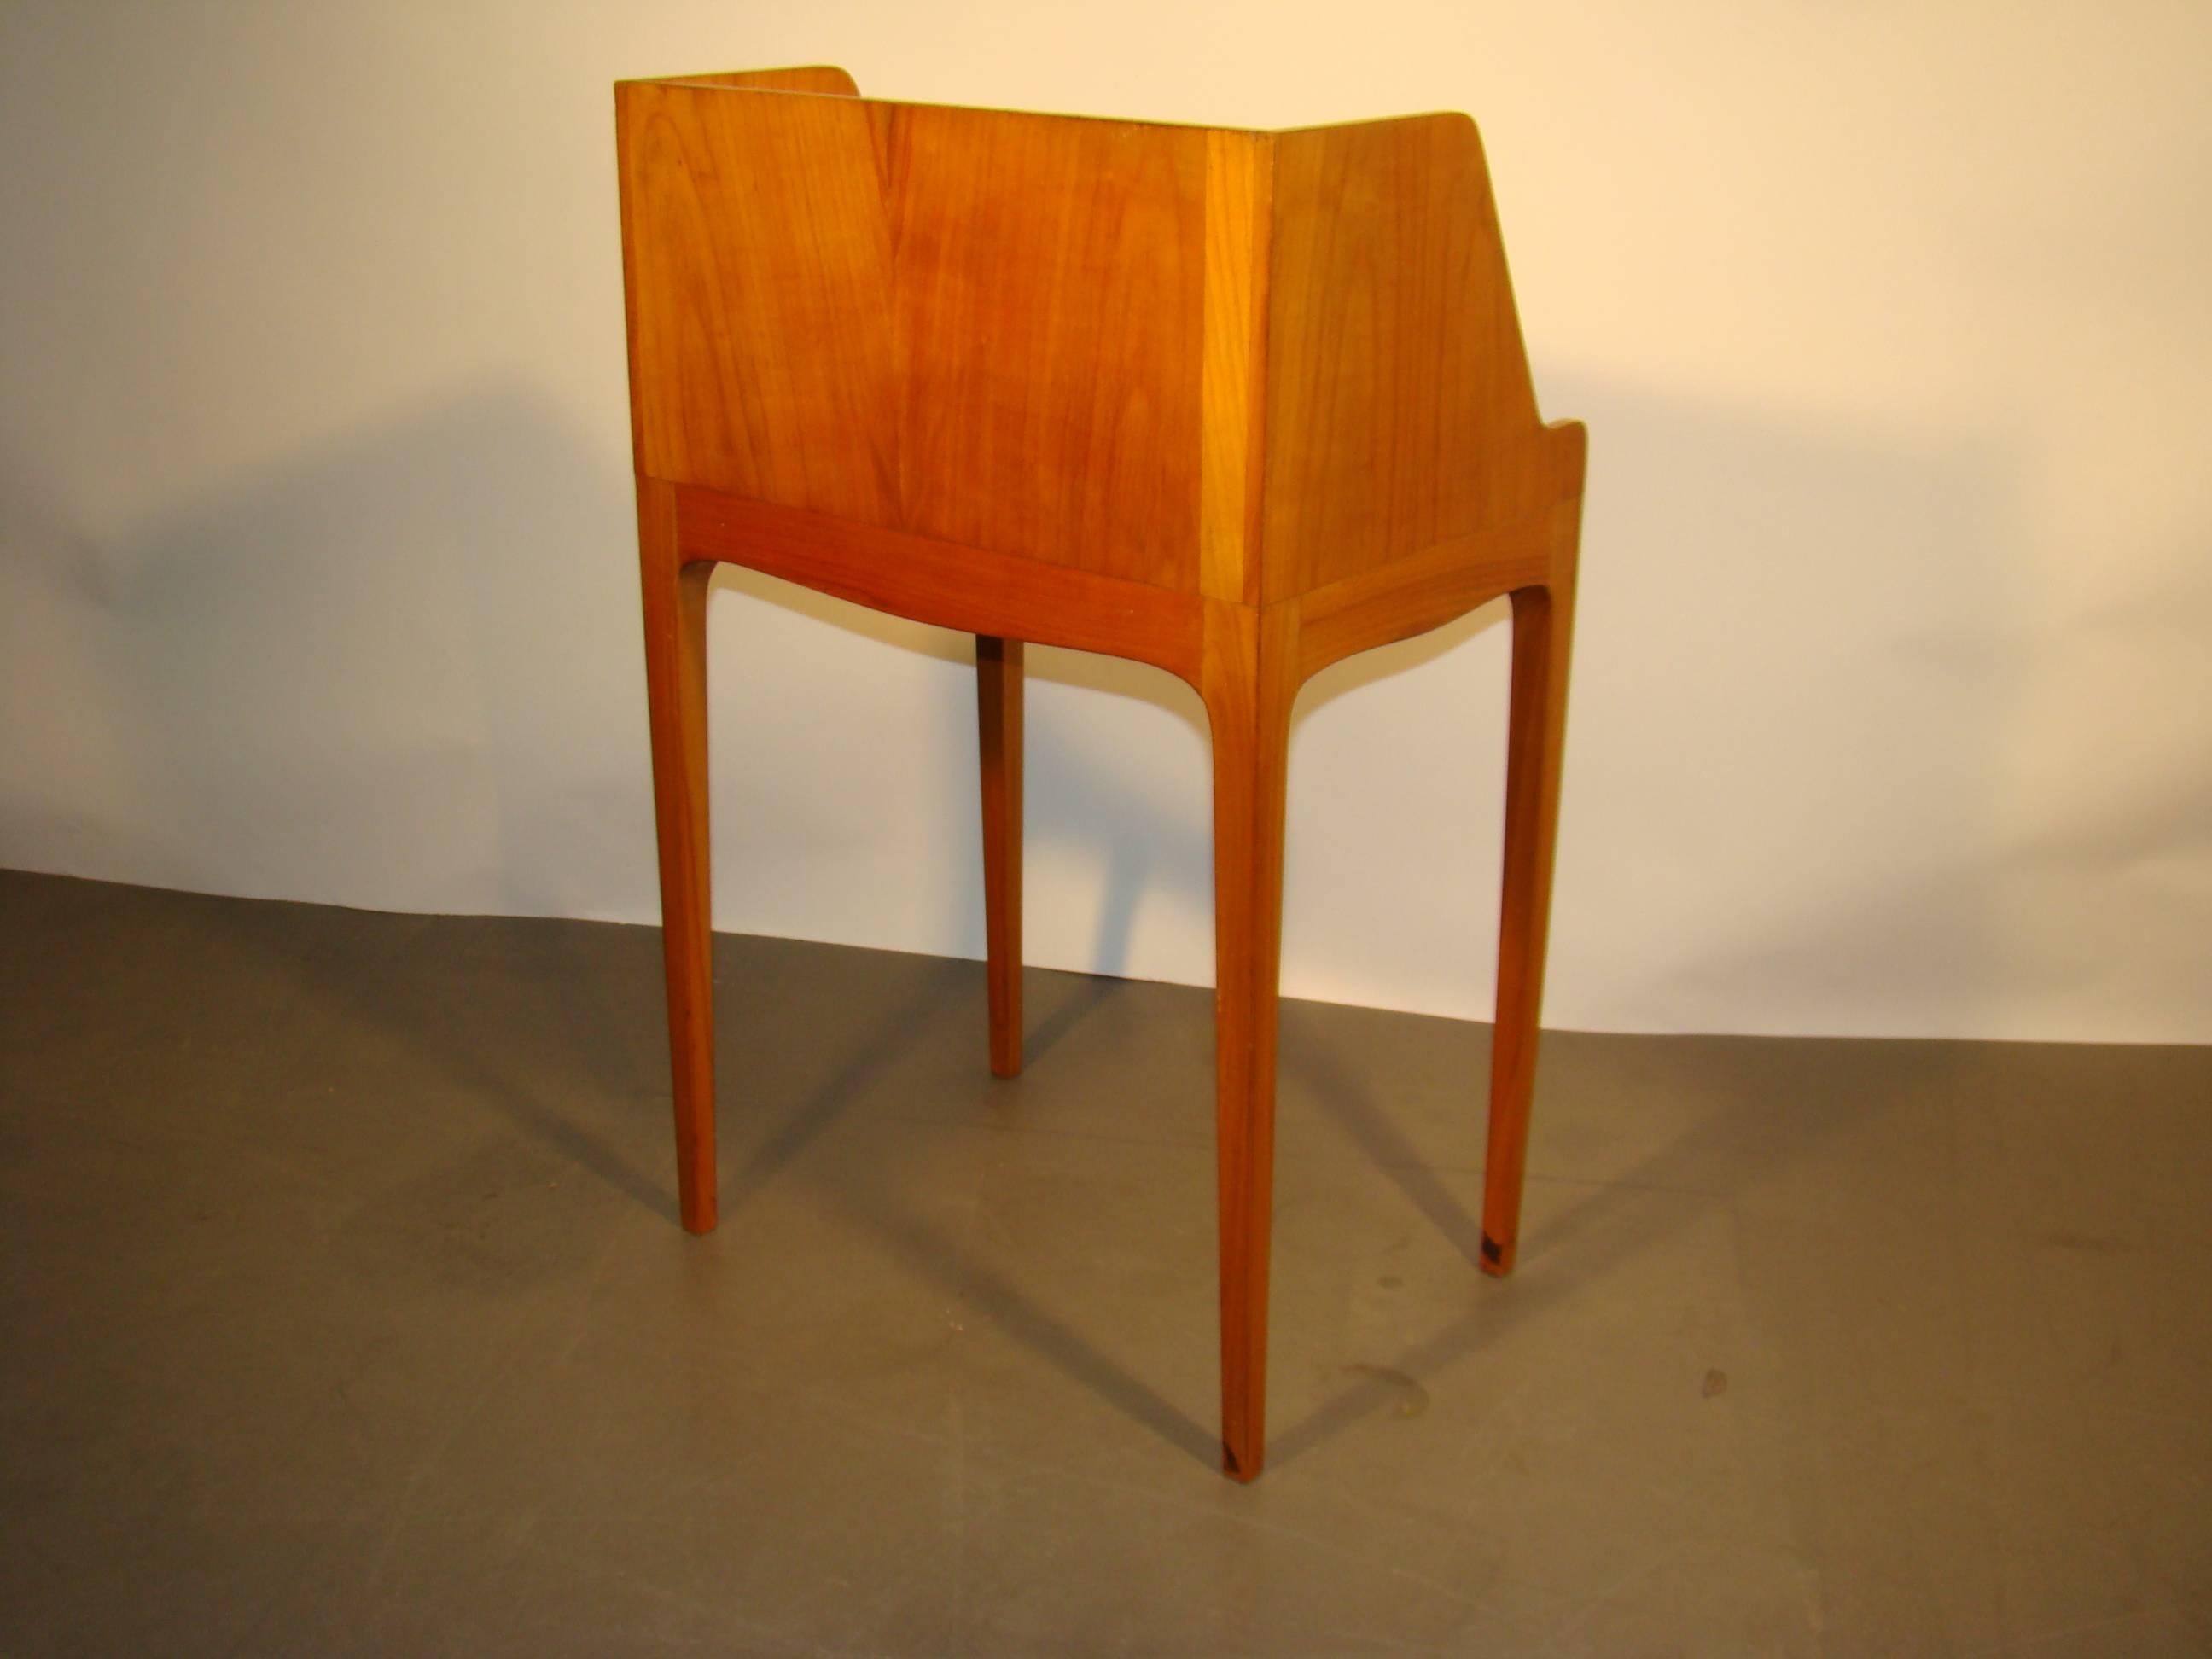 Mid-20th Century Italian Work Side Table in Solid and Veneer Cherry Wood, circa 1940-1950 For Sale